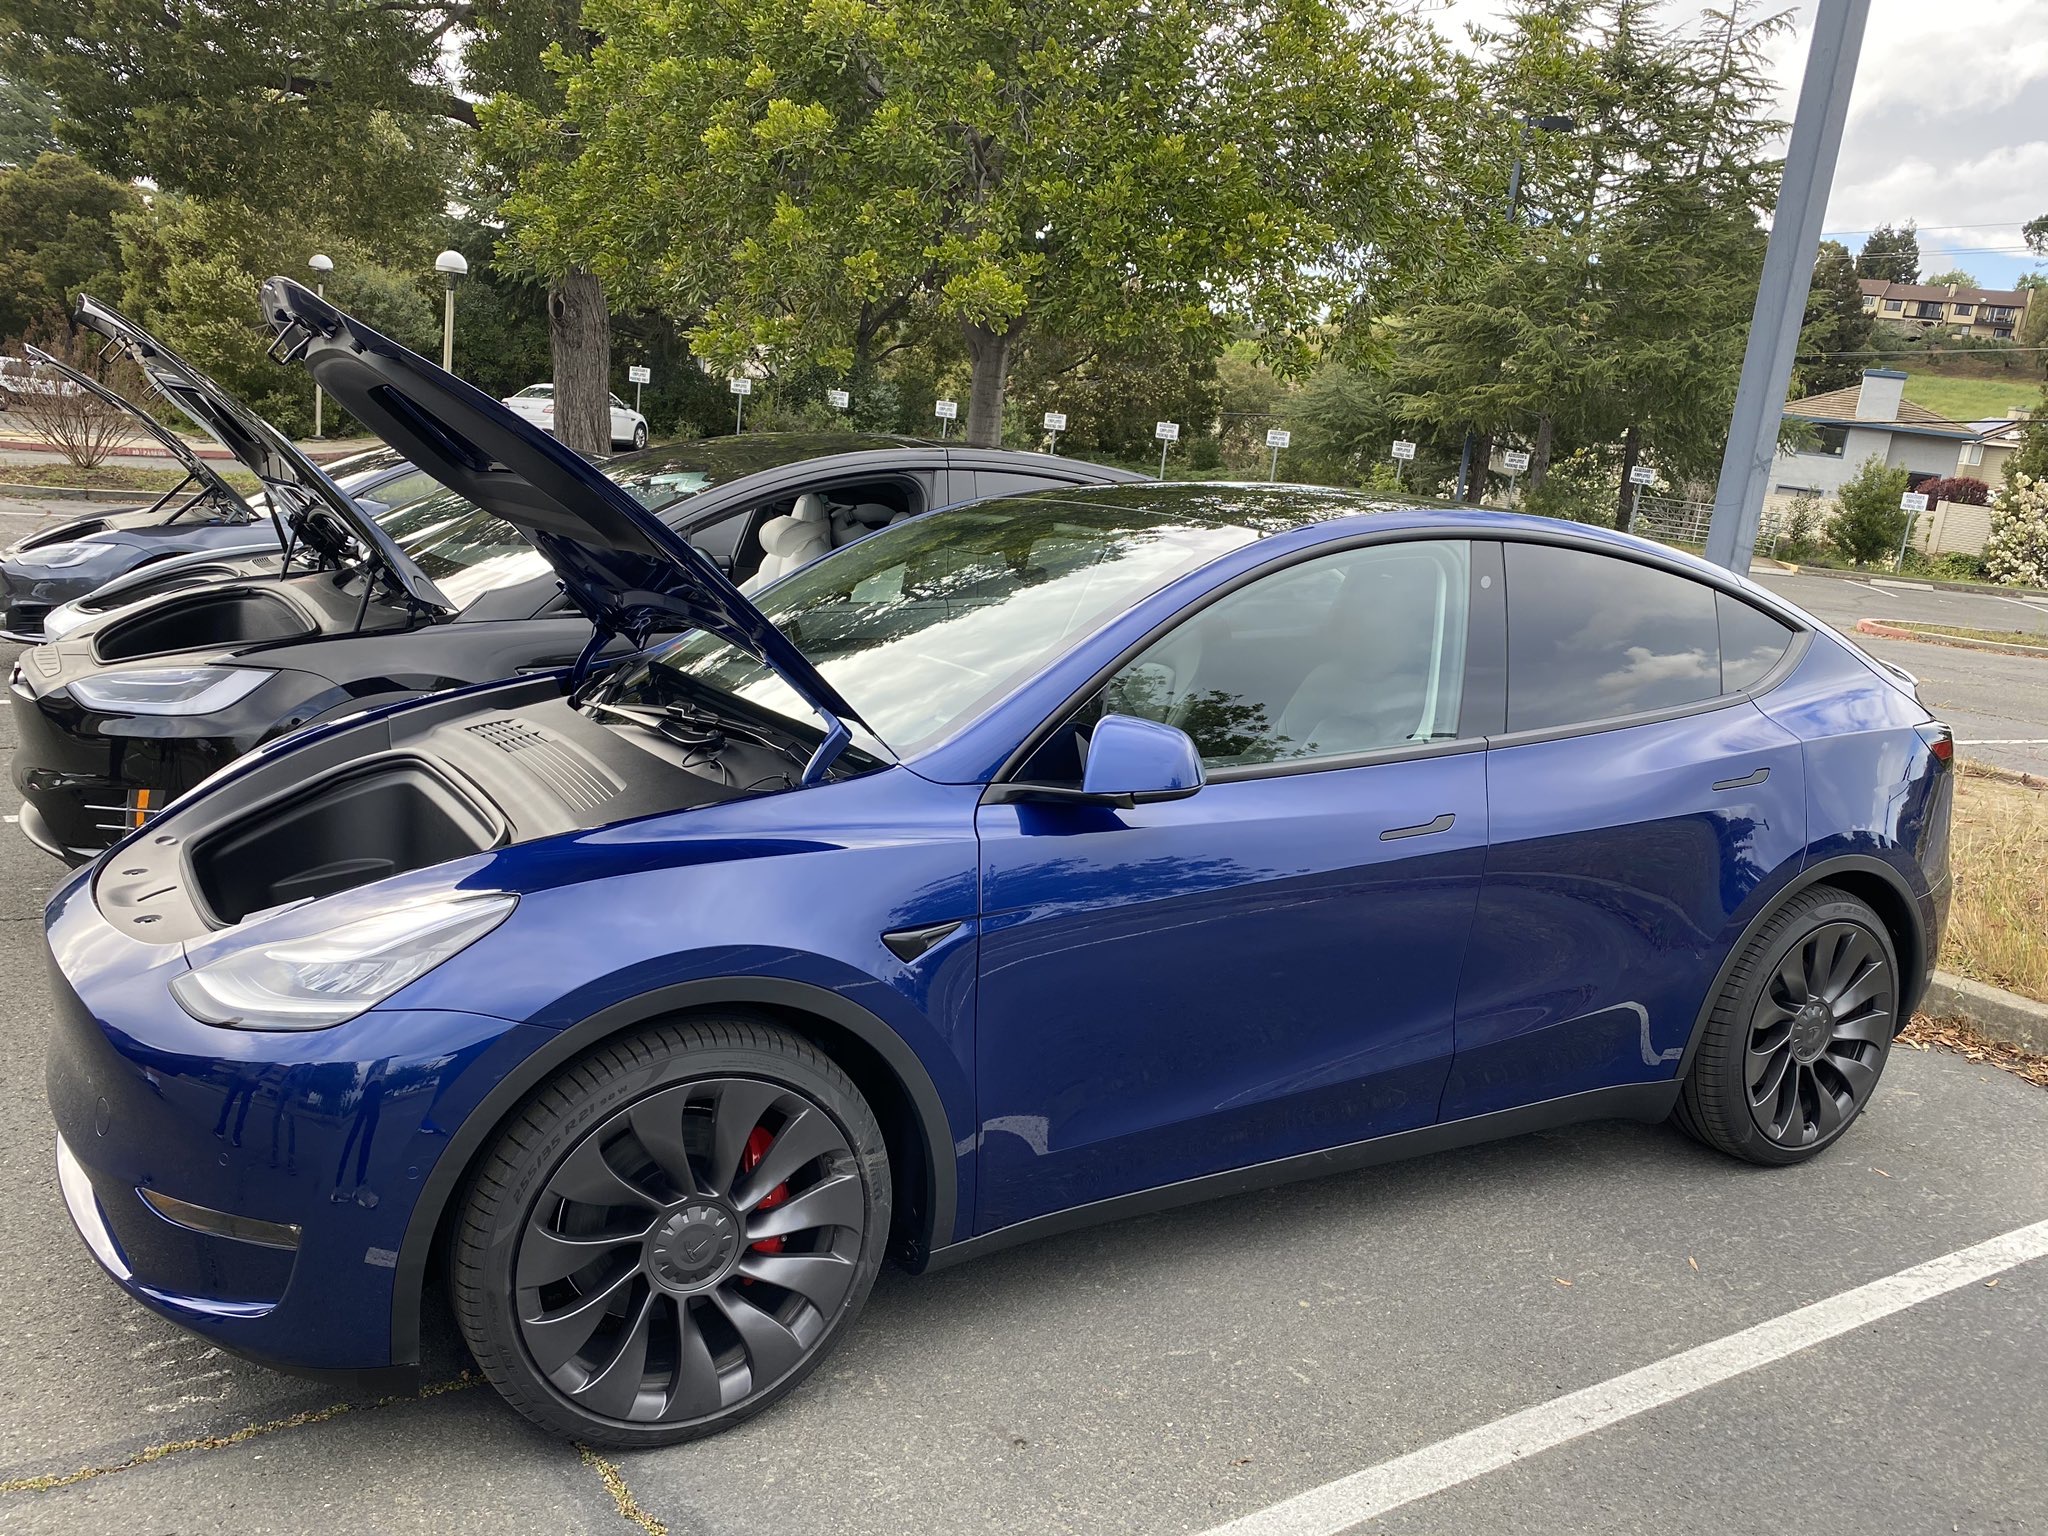 Buy Accessories for Model Y at EveryAmp